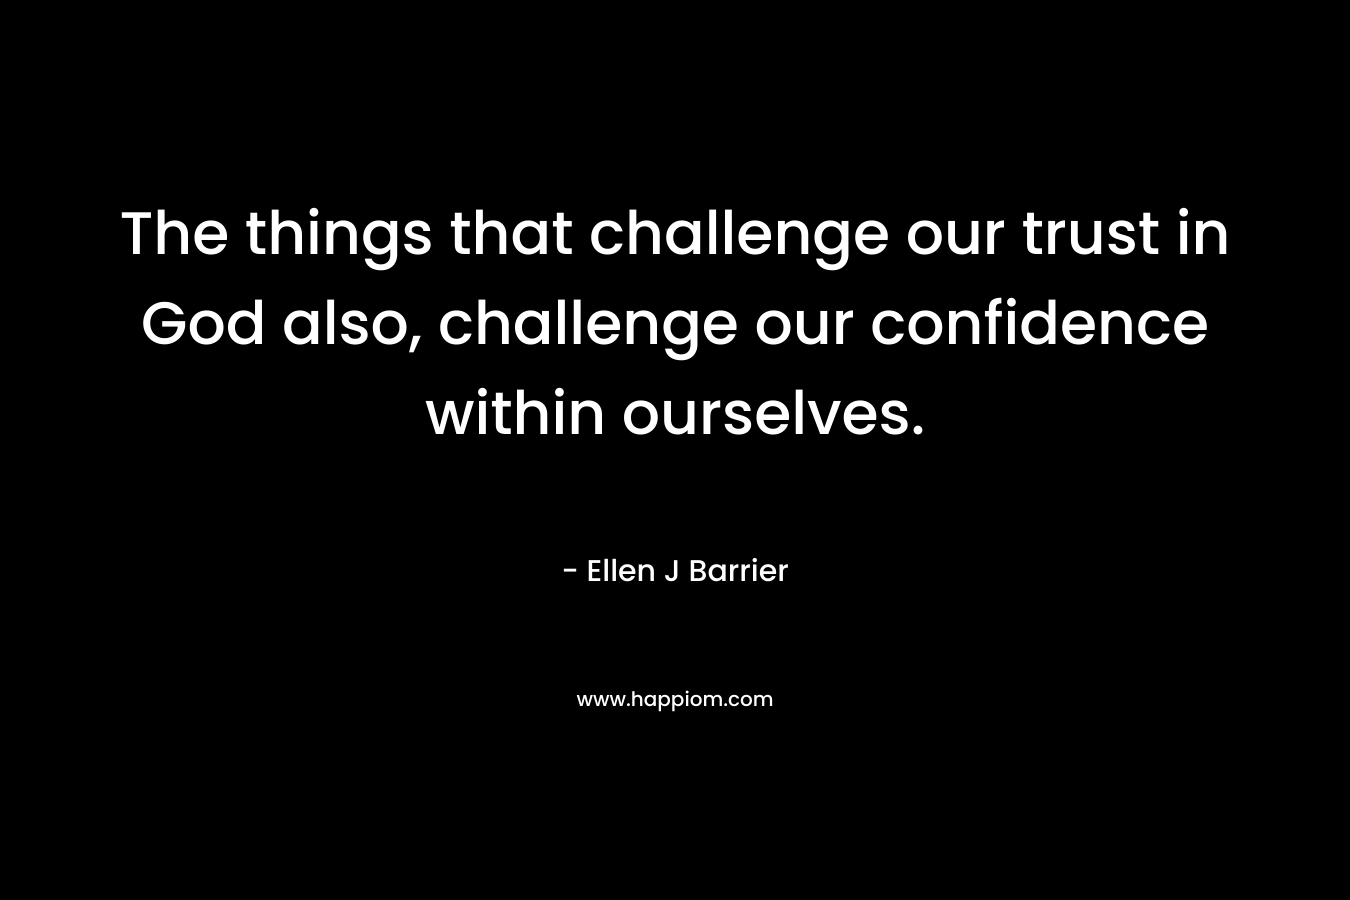 The things that challenge our trust in God also, challenge our confidence within ourselves.